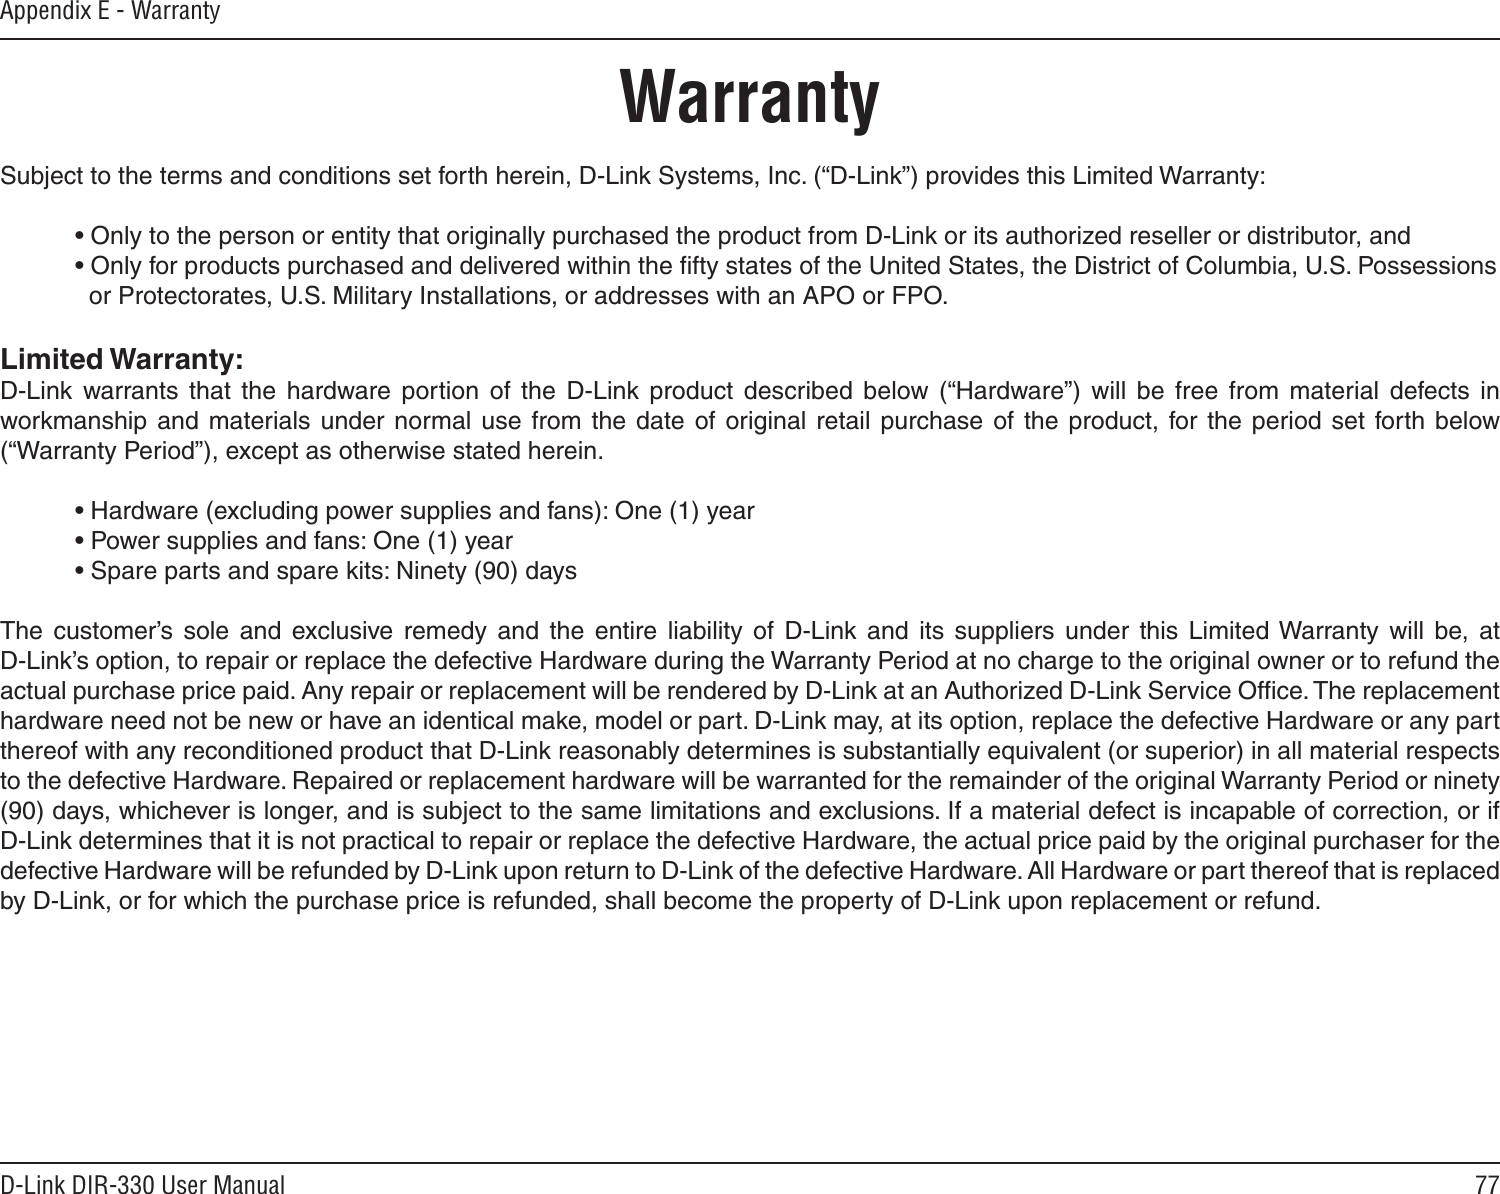 77D-Link DIR-330 User ManualAppendix E - WarrantyWarrantySubject to the terms and conditions set forth herein, D-Link Systems, Inc. (“D-Link”) provides this Limited Warranty:  • Only to the person or entity that originally purchased the product from D-Link or its authorized reseller or distributor, and  • Only for products purchased and delivered within the ﬁfty states of the United States, the District of Columbia, U.S. Possessions      or Protectorates, U.S. Military Installations, or addresses with an APO or FPO.Limited Warranty:D-Link  warrants  that  the  hardware  portion  of  the  D-Link  product  described  below  (“Hardware”)  will  be  free  from  material  defects  in workmanship  and  materials  under  normal  use from  the  date  of original retail  purchase  of  the product,  for the  period  set  forth  below (“Warranty Period”), except as otherwise stated herein.  • Hardware (excluding power supplies and fans): One (1) year  • Power supplies and fans: One (1) year  • Spare parts and spare kits: Ninety (90) daysThe  customer’s  sole  and  exclusive  remedy  and  the  entire  liability  of  D-Link  and  its  suppliers  under  this  Limited Warranty  will  be,  at  D-Link’s option, to repair or replace the defective Hardware during the Warranty Period at no charge to the original owner or to refund the actual purchase price paid. Any repair or replacement will be rendered by D-Link at an Authorized D-Link Service Ofﬁce. The replacement hardware need not be new or have an identical make, model or part. D-Link may, at its option, replace the defective Hardware or any part thereof with any reconditioned product that D-Link reasonably determines is substantially equivalent (or superior) in all material respects to the defective Hardware. Repaired or replacement hardware will be warranted for the remainder of the original Warranty Period or ninety (90) days, whichever is longer, and is subject to the same limitations and exclusions. If a material defect is incapable of correction, or if D-Link determines that it is not practical to repair or replace the defective Hardware, the actual price paid by the original purchaser for the defective Hardware will be refunded by D-Link upon return to D-Link of the defective Hardware. All Hardware or part thereof that is replaced by D-Link, or for which the purchase price is refunded, shall become the property of D-Link upon replacement or refund.